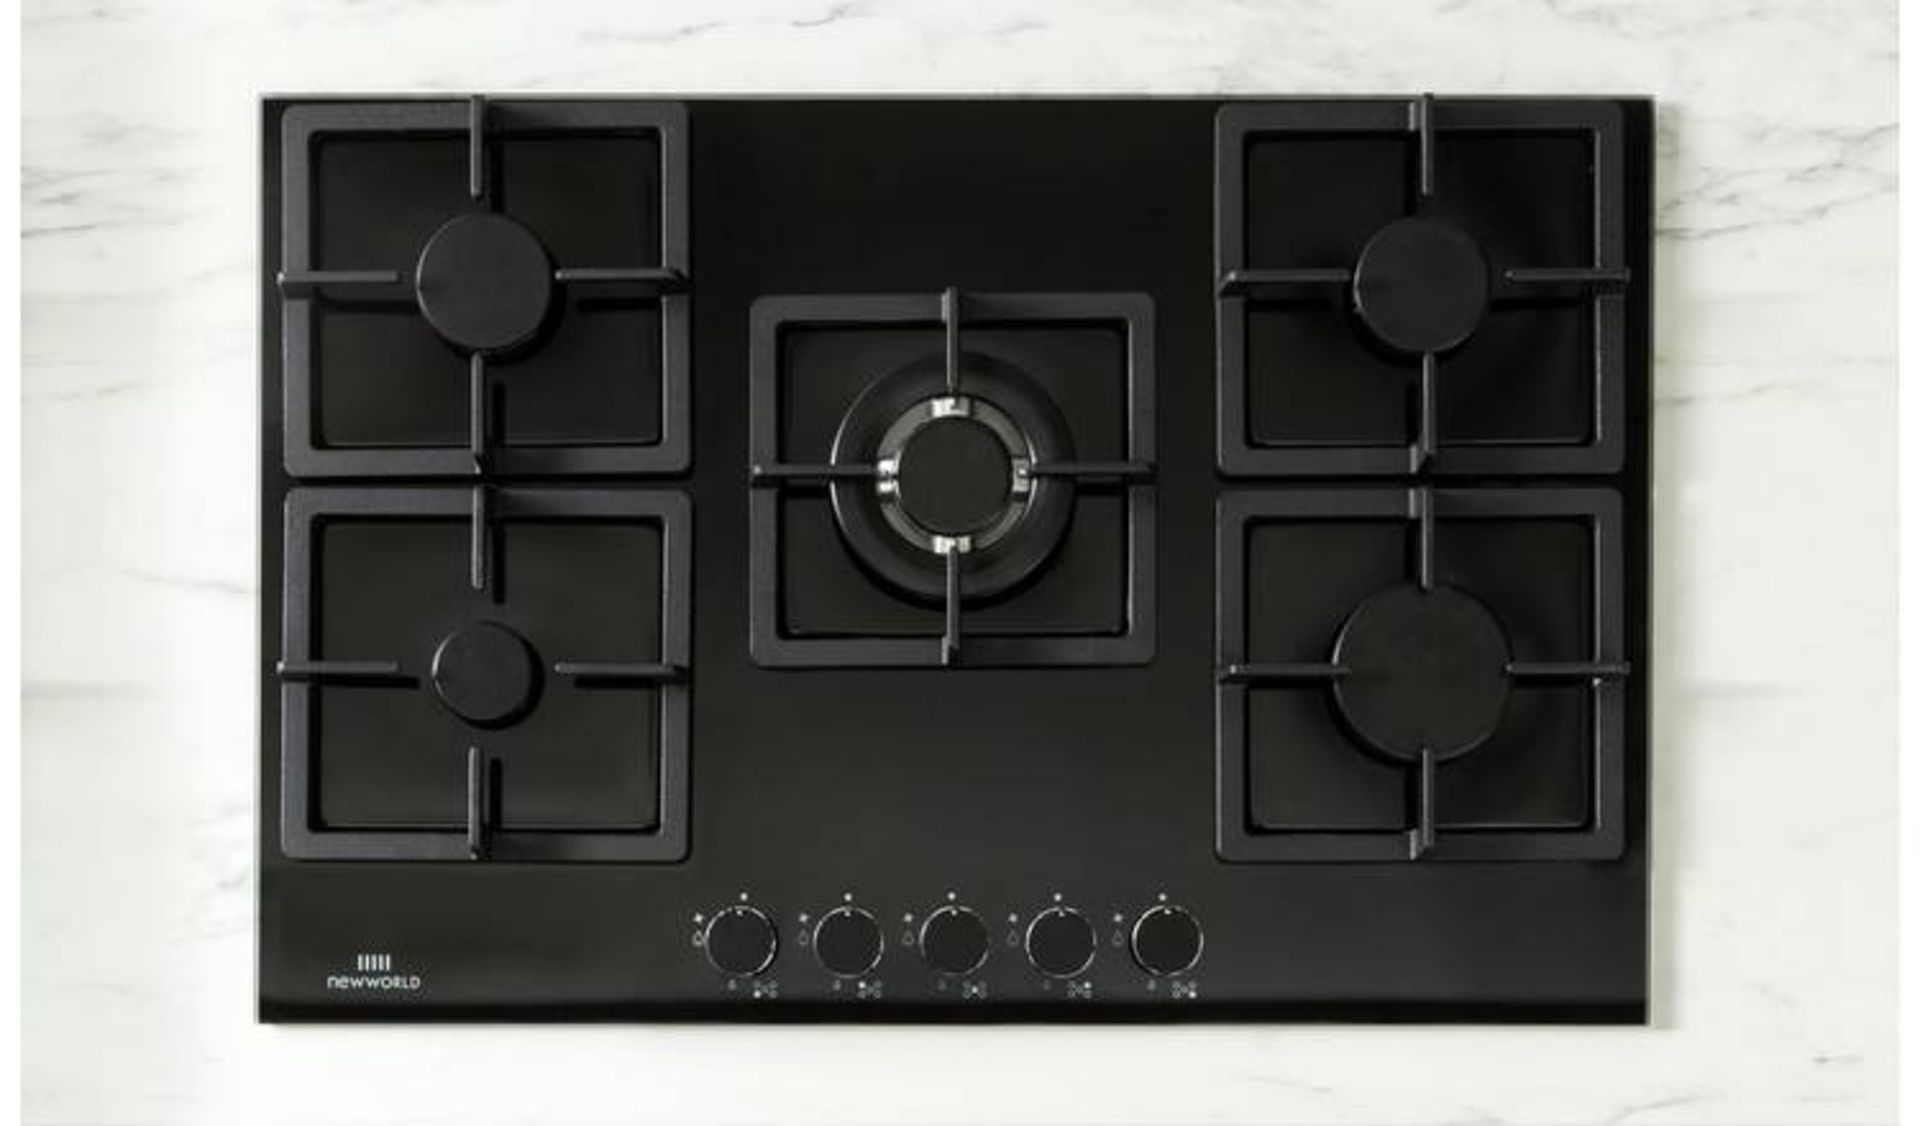 + VAT Grade A/B New World NWLEG75 Cast Iron Support Gas Hob - Five Cooking Zones - Dial Control -